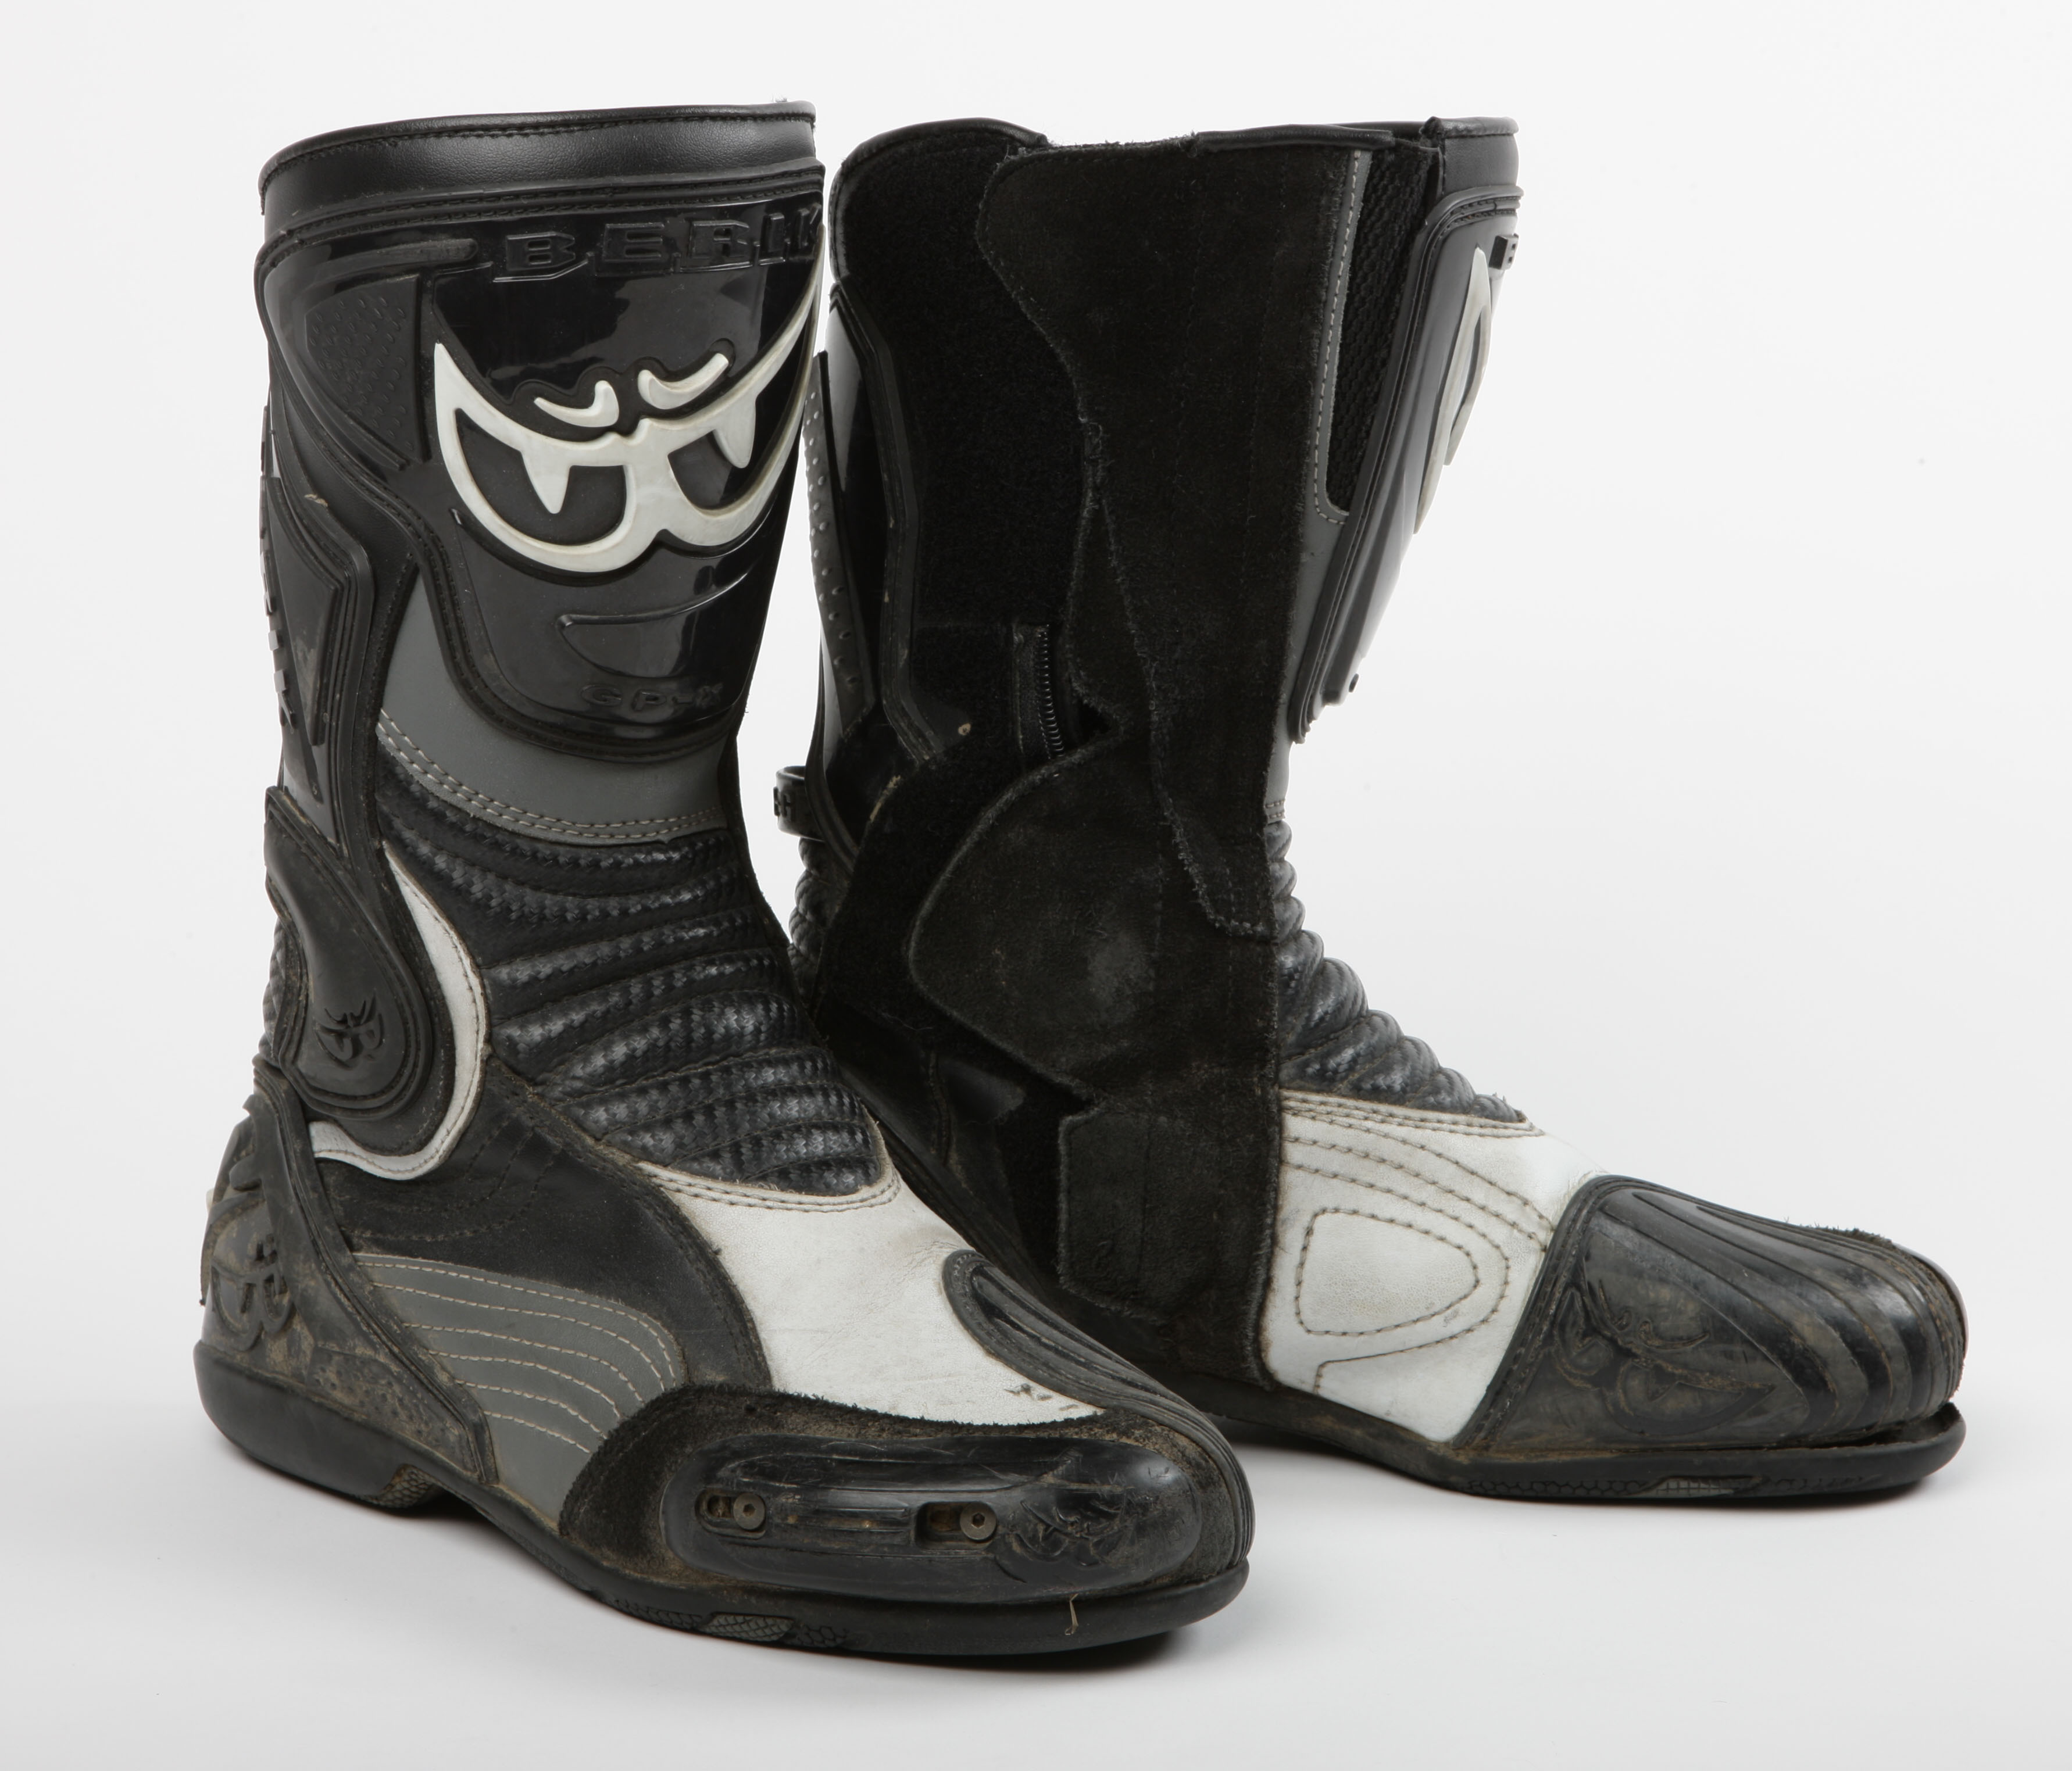 Used Review: Berik boots |